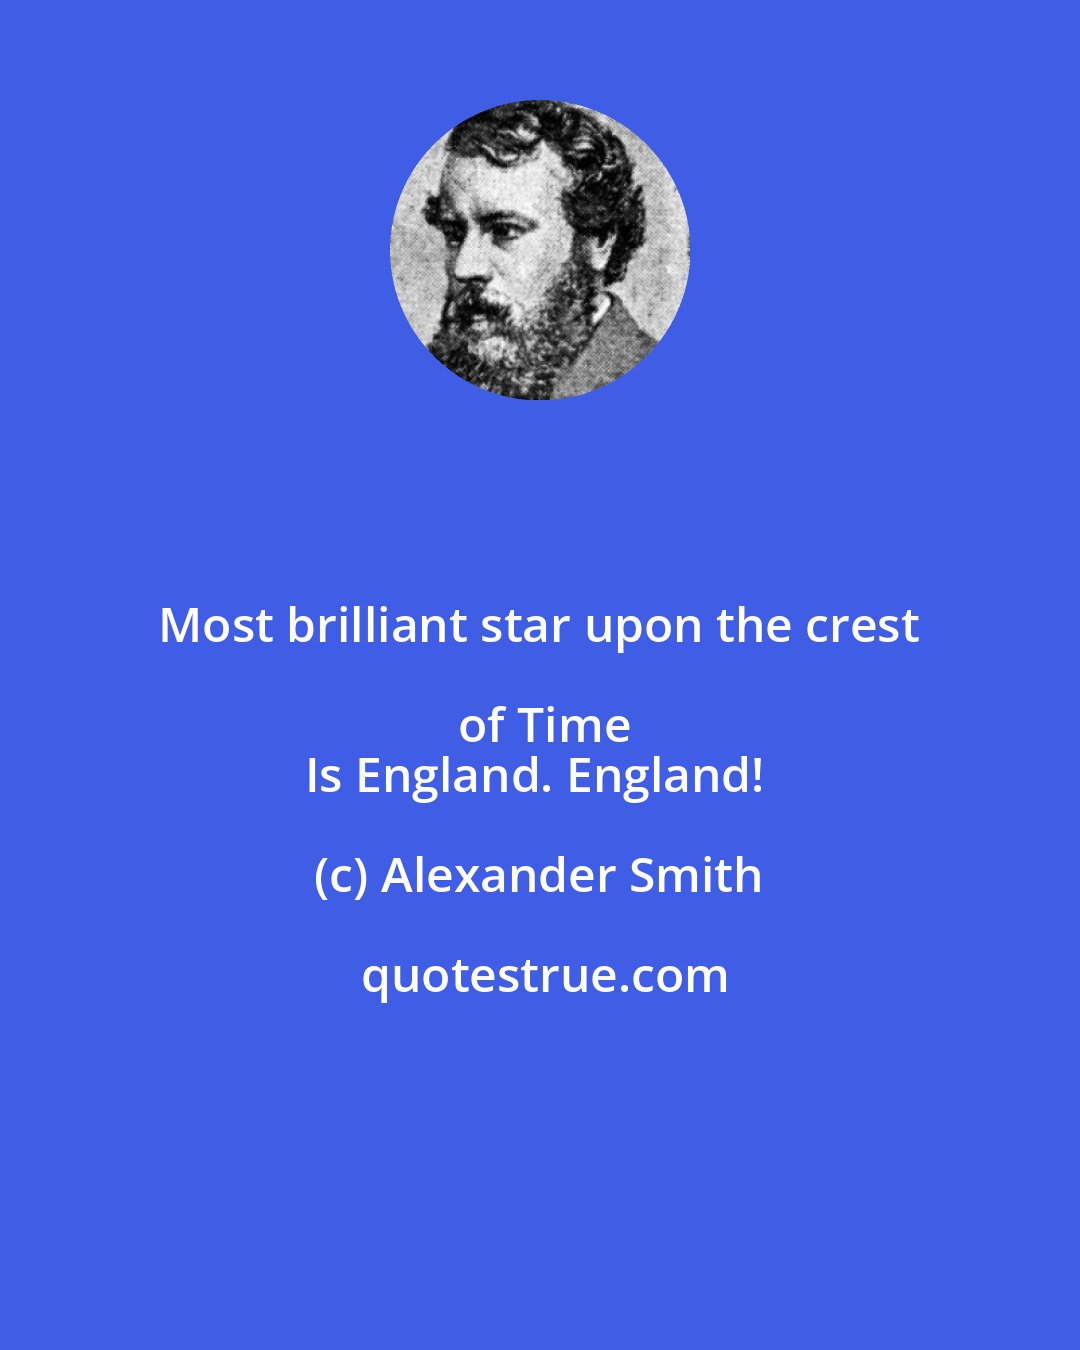 Alexander Smith: Most brilliant star upon the crest of Time
Is England. England!